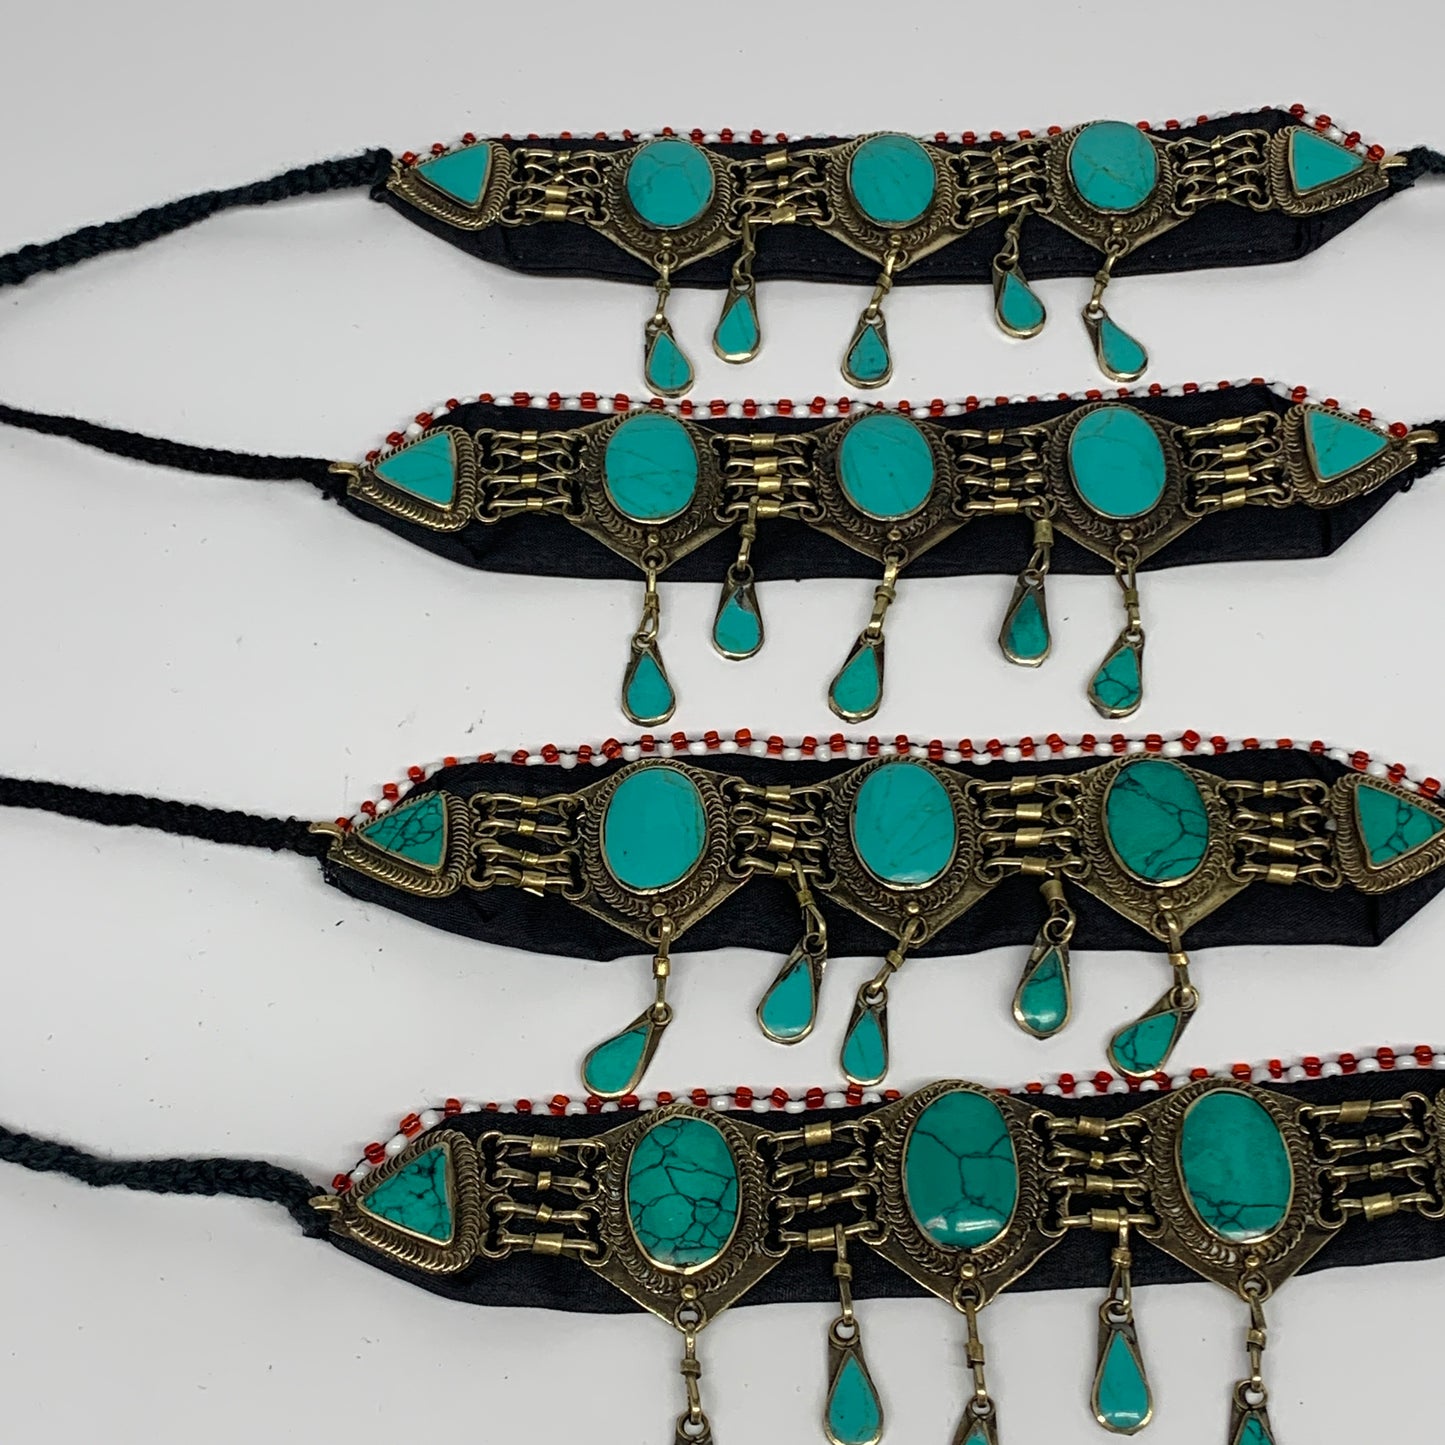 1pc, 24" Choker Necklace Afghan Turkmen Tribal 5 Cab Turquoise Inlay Fashion,B13